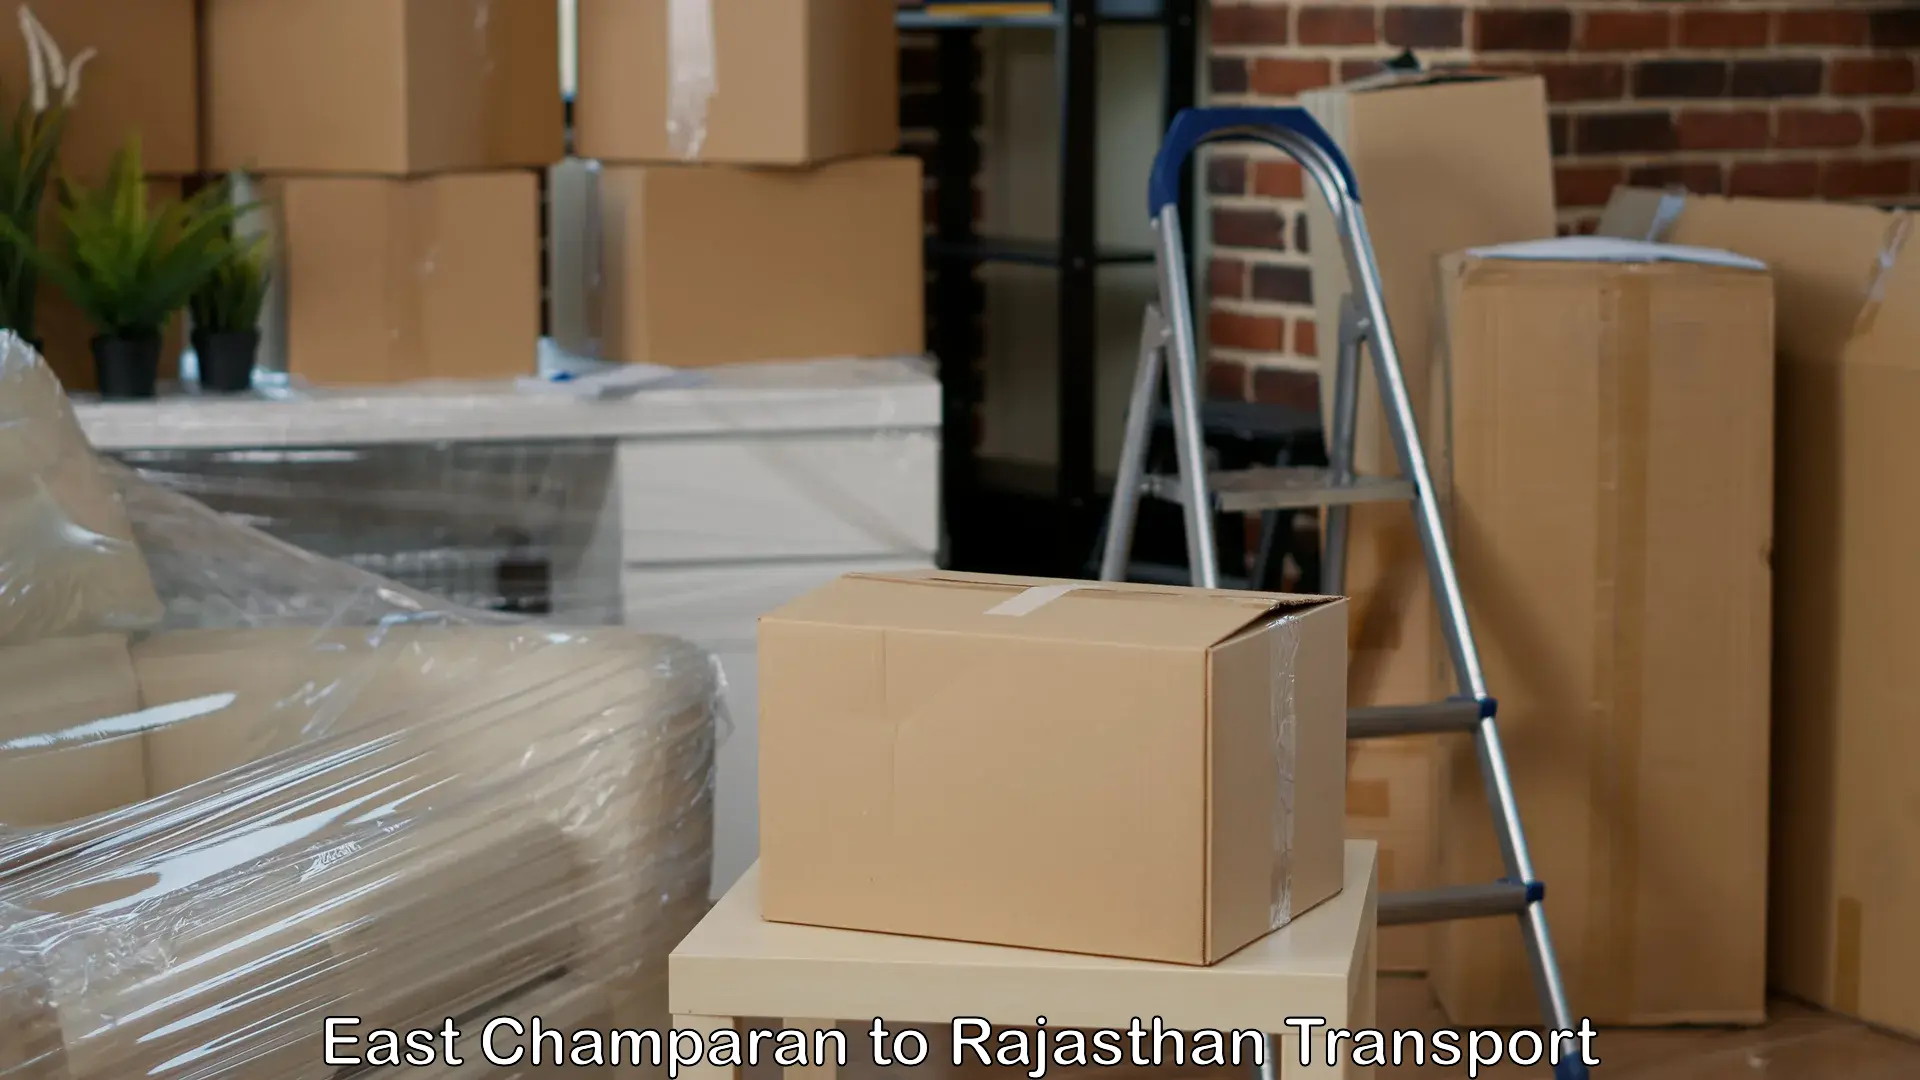 Daily parcel service transport East Champaran to Gogunda